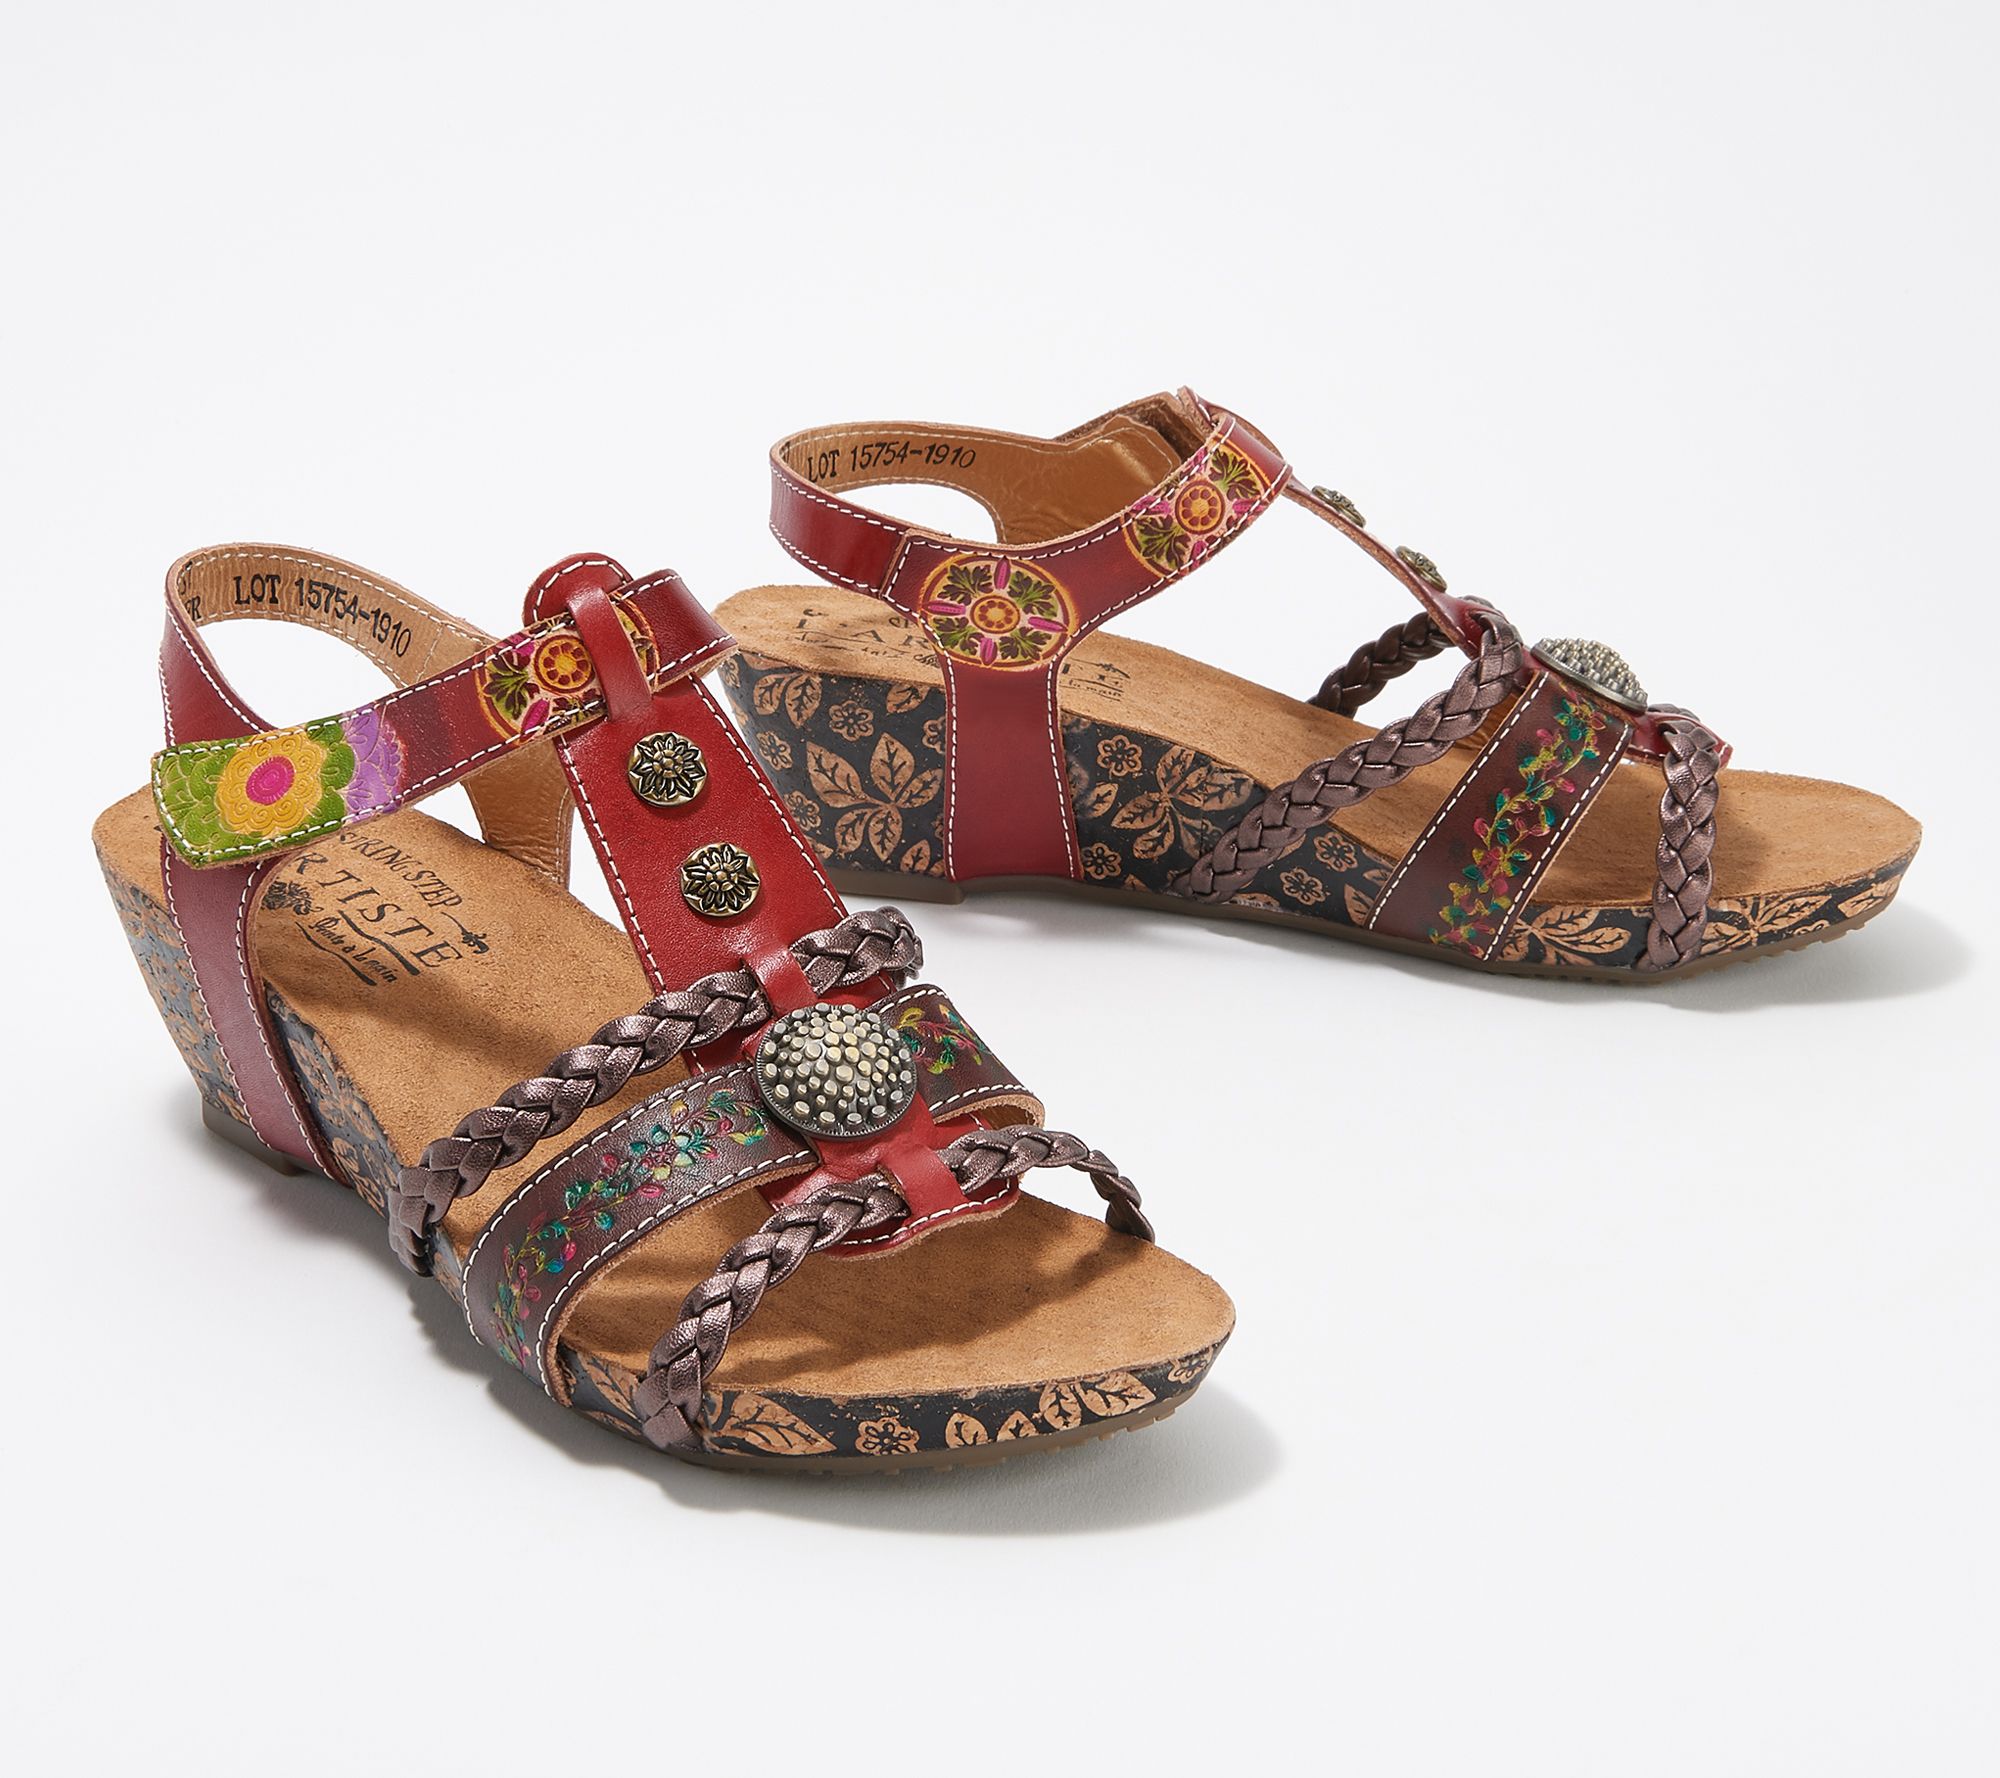 L'Artiste by Spring Step Leather Wedges - Acateia - QVC.com